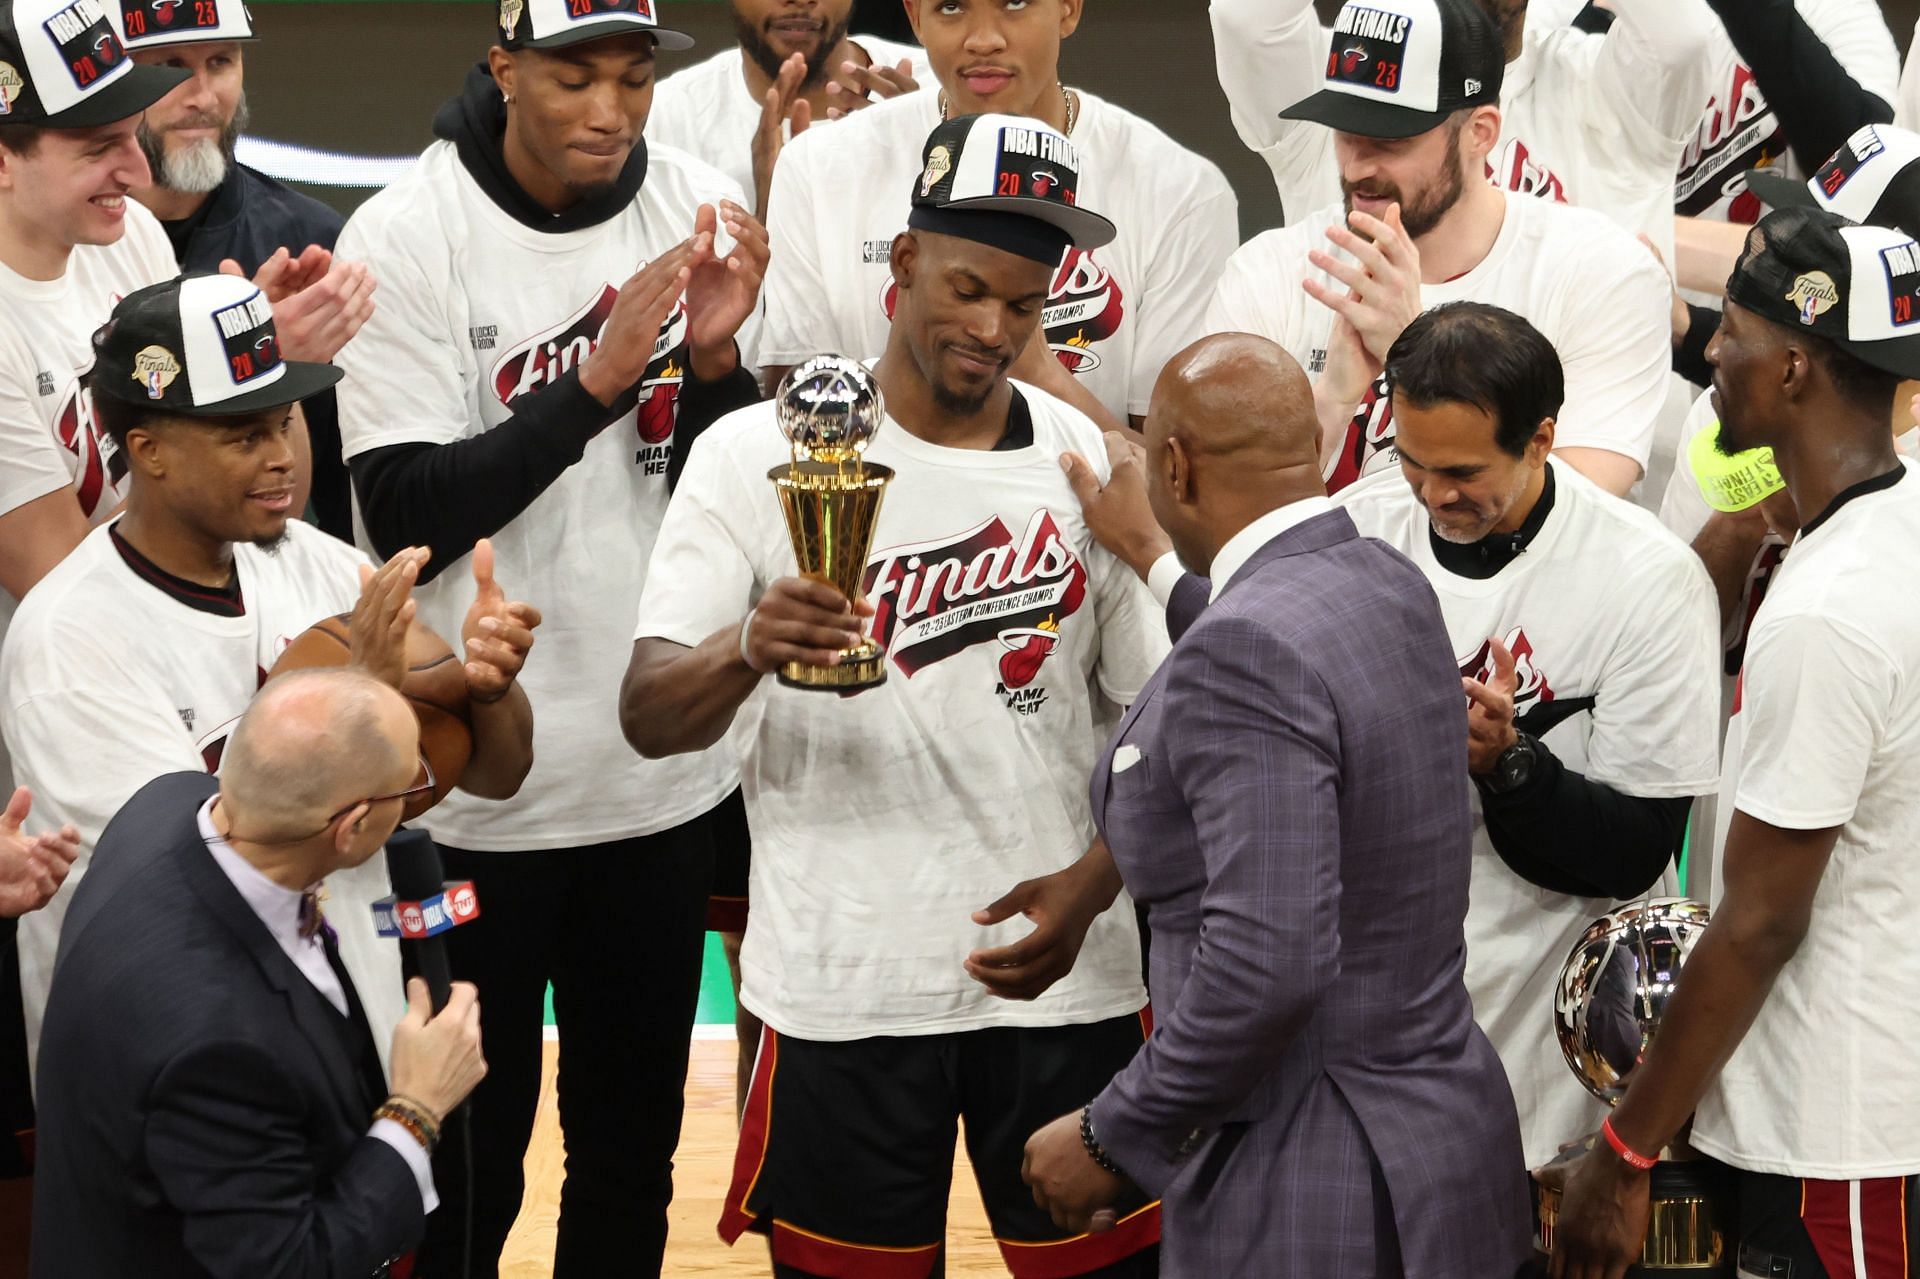 Jimmy Butler of the Miami Heat holding the Larry Bird Eastern Conference Finals MVP trophy.